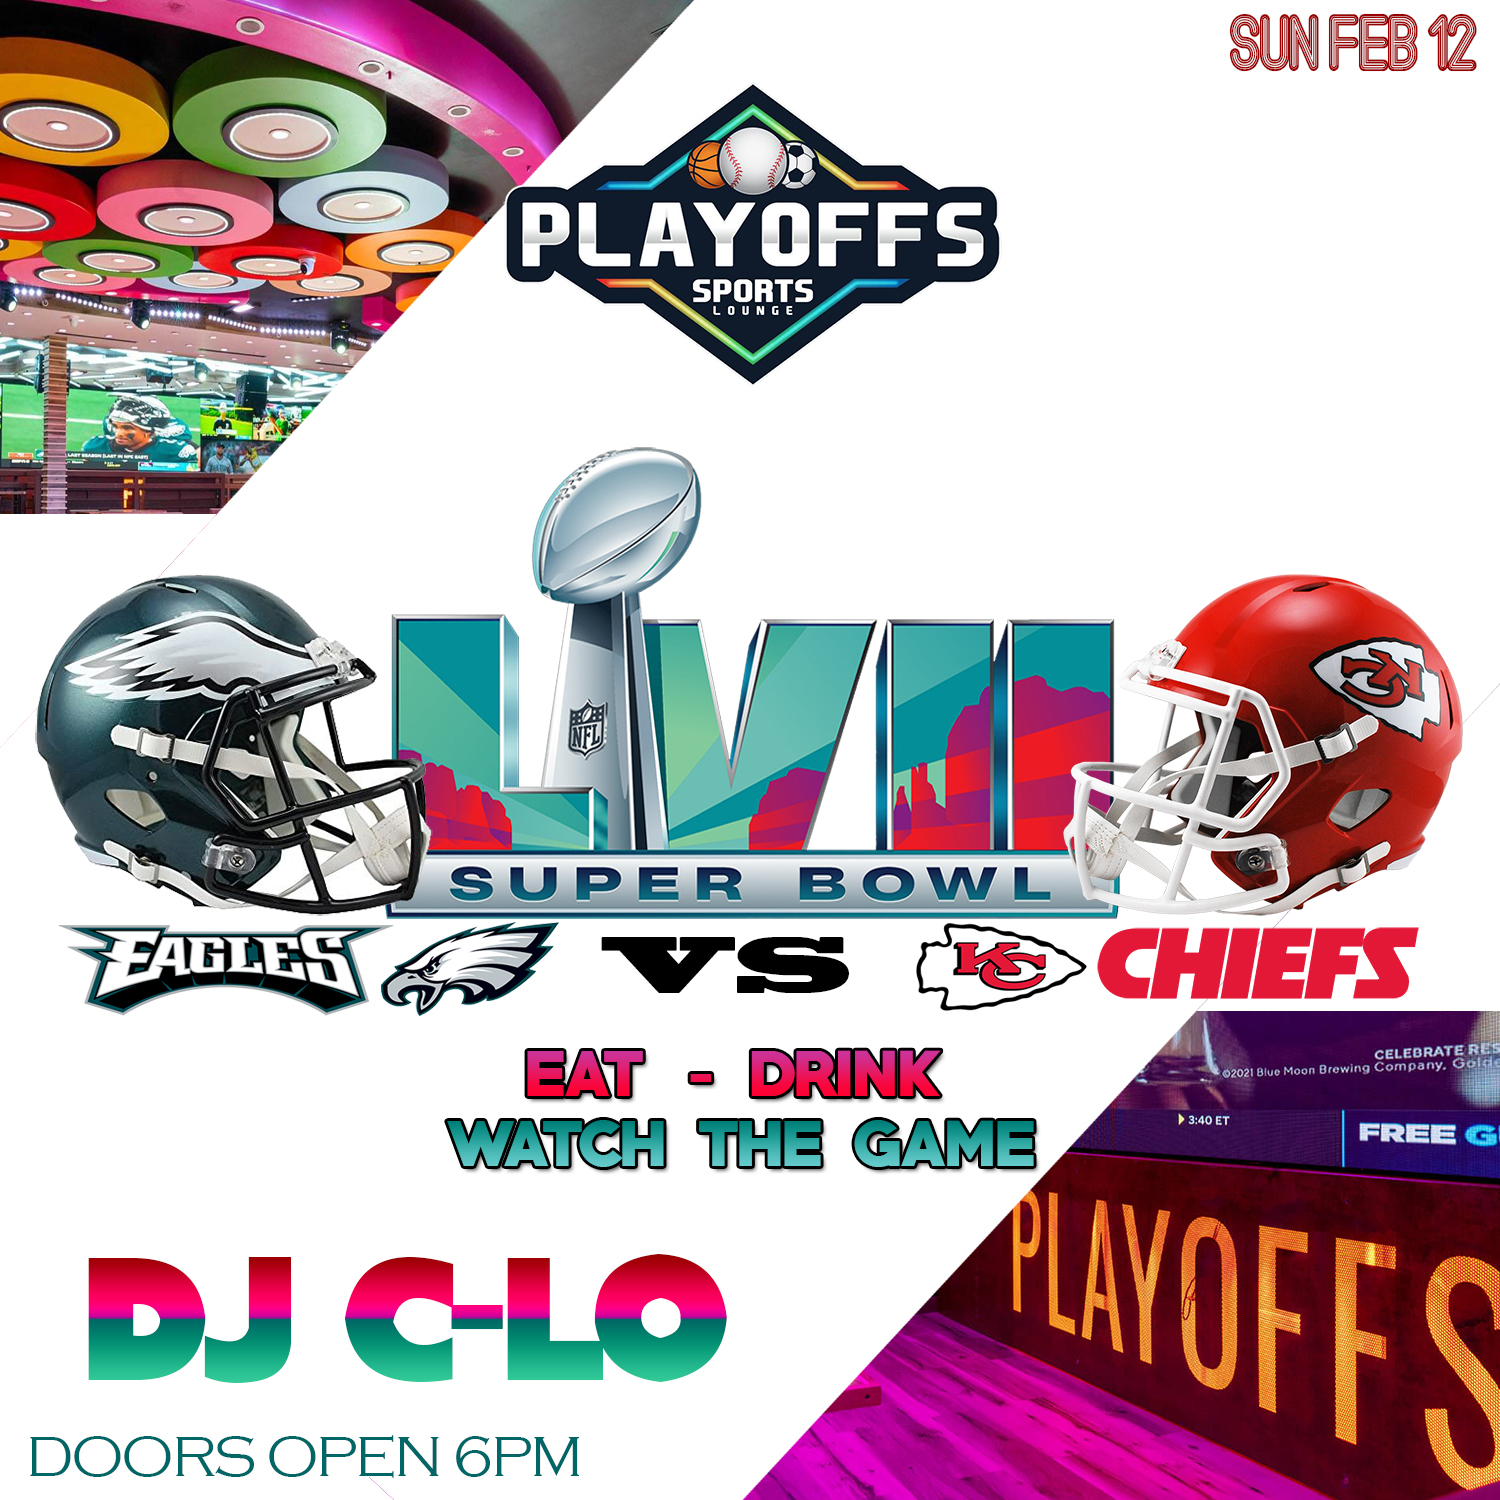 Superbowl Viewing Party at Playoffs Sports Lounge